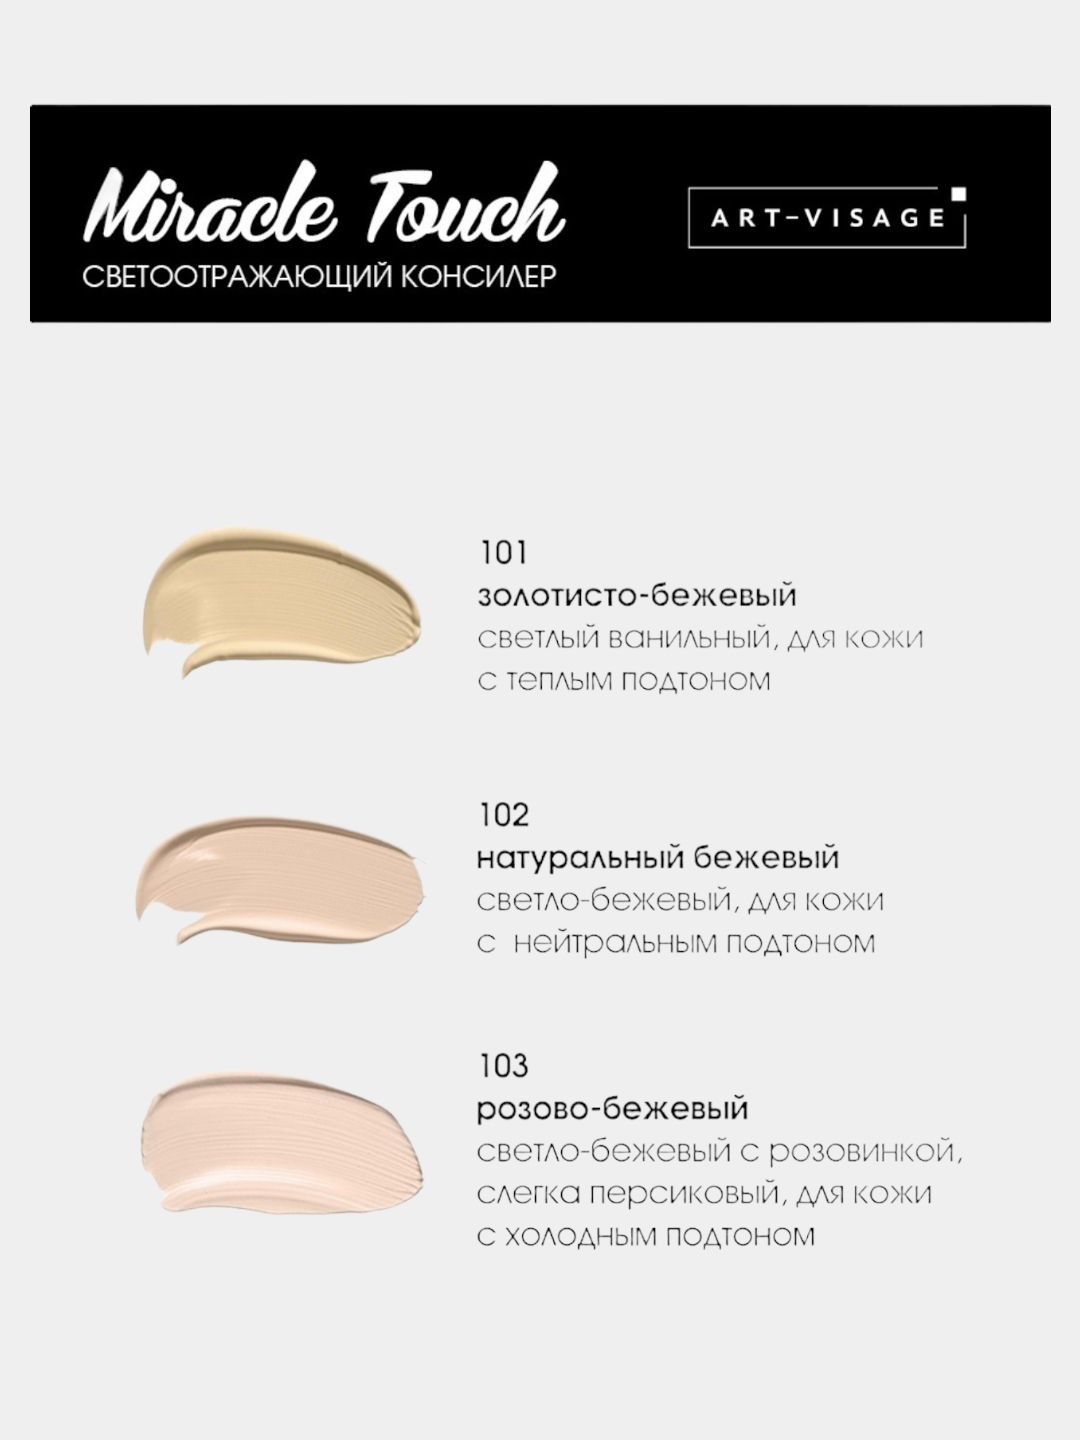 Art-visage консилер Miracle Touch